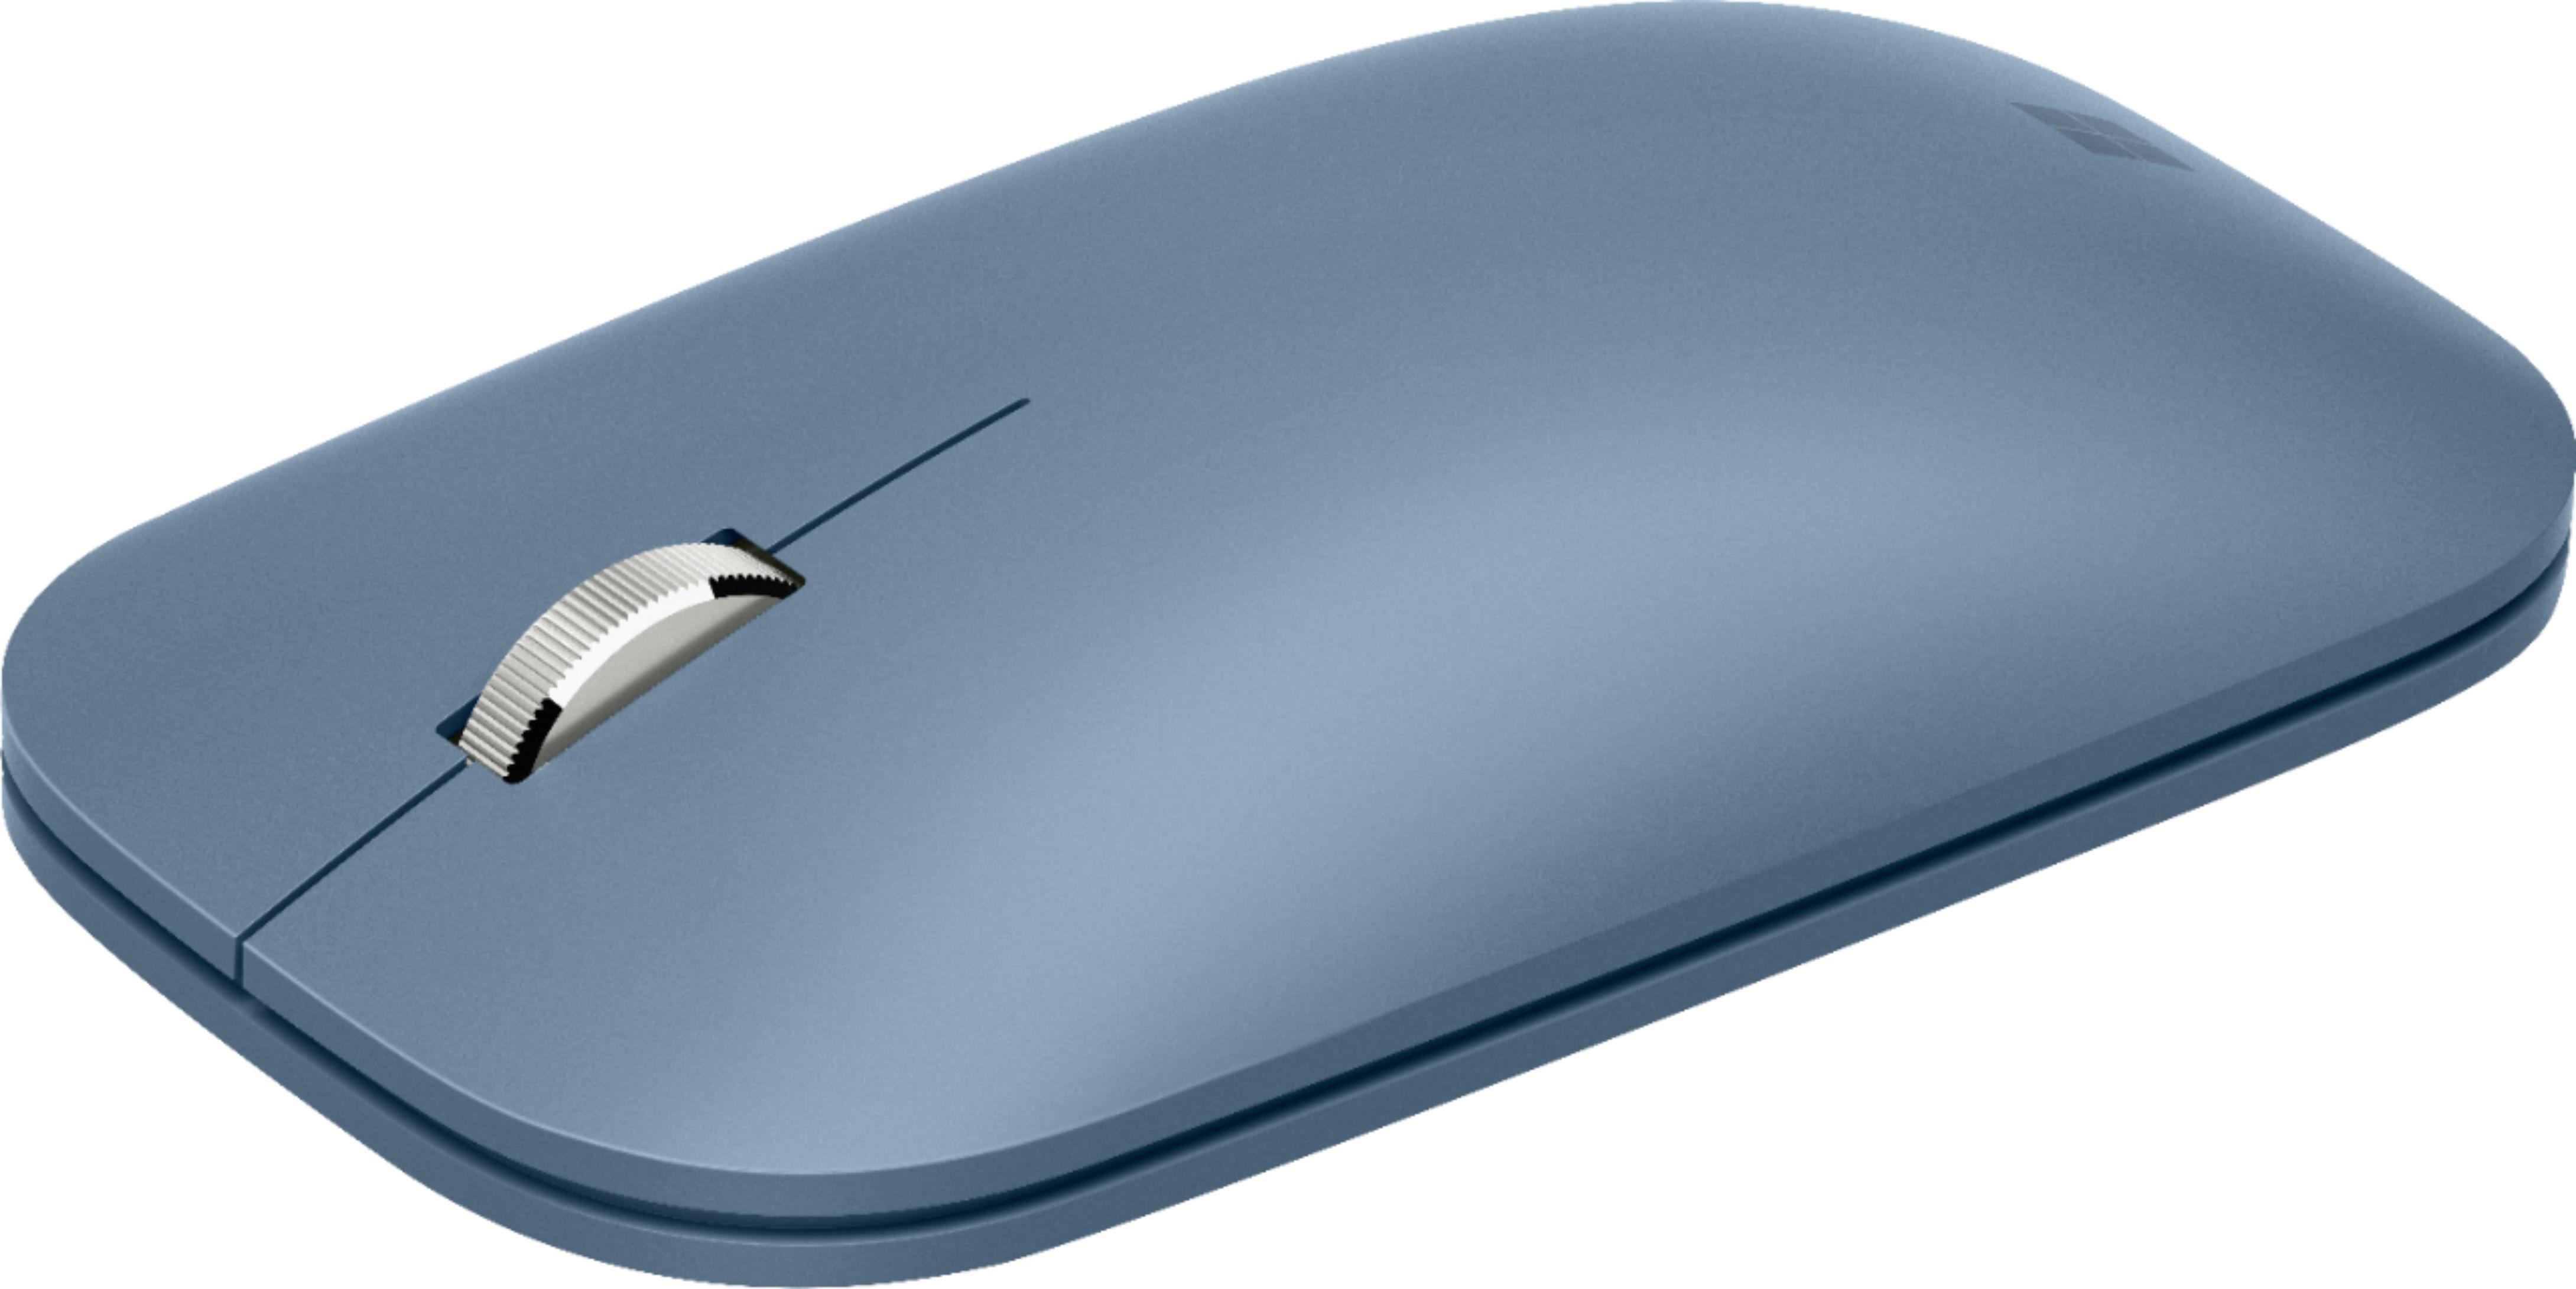 2 Microsoft Surface Mobile Mouse for $29.98 Shipped